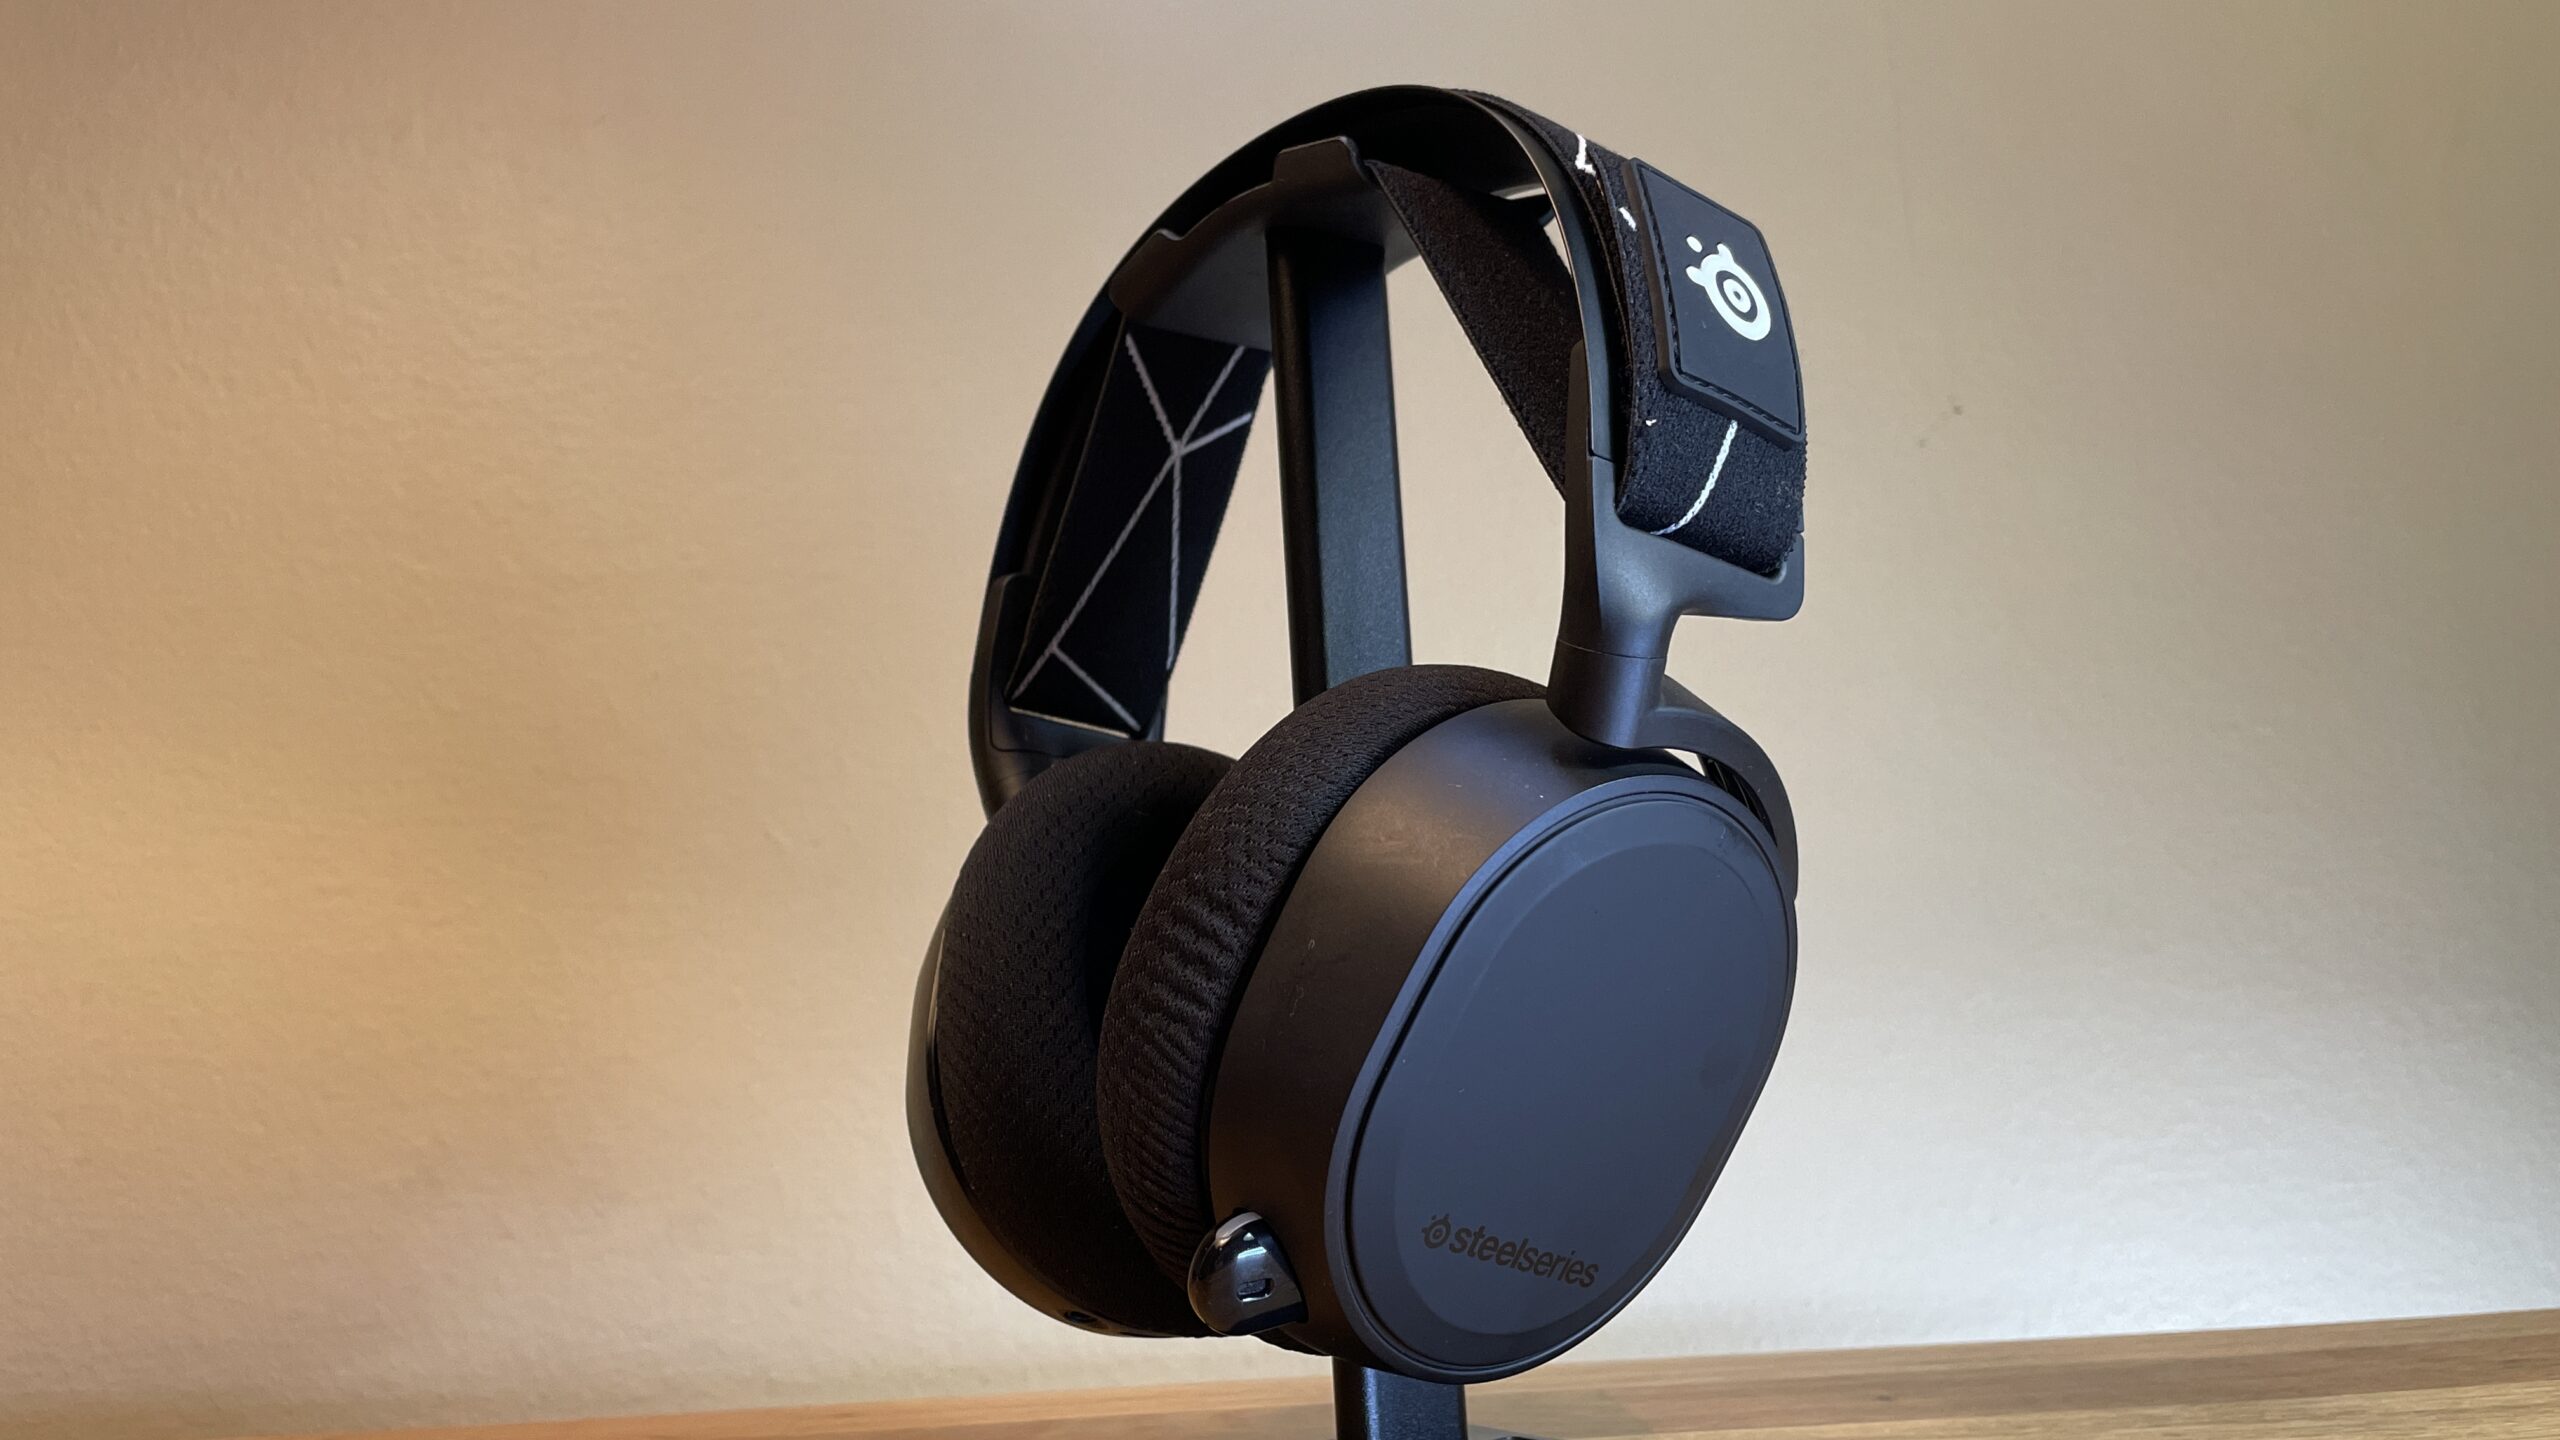 Steelseries Arctis 7 review: The best gaming headset ever made